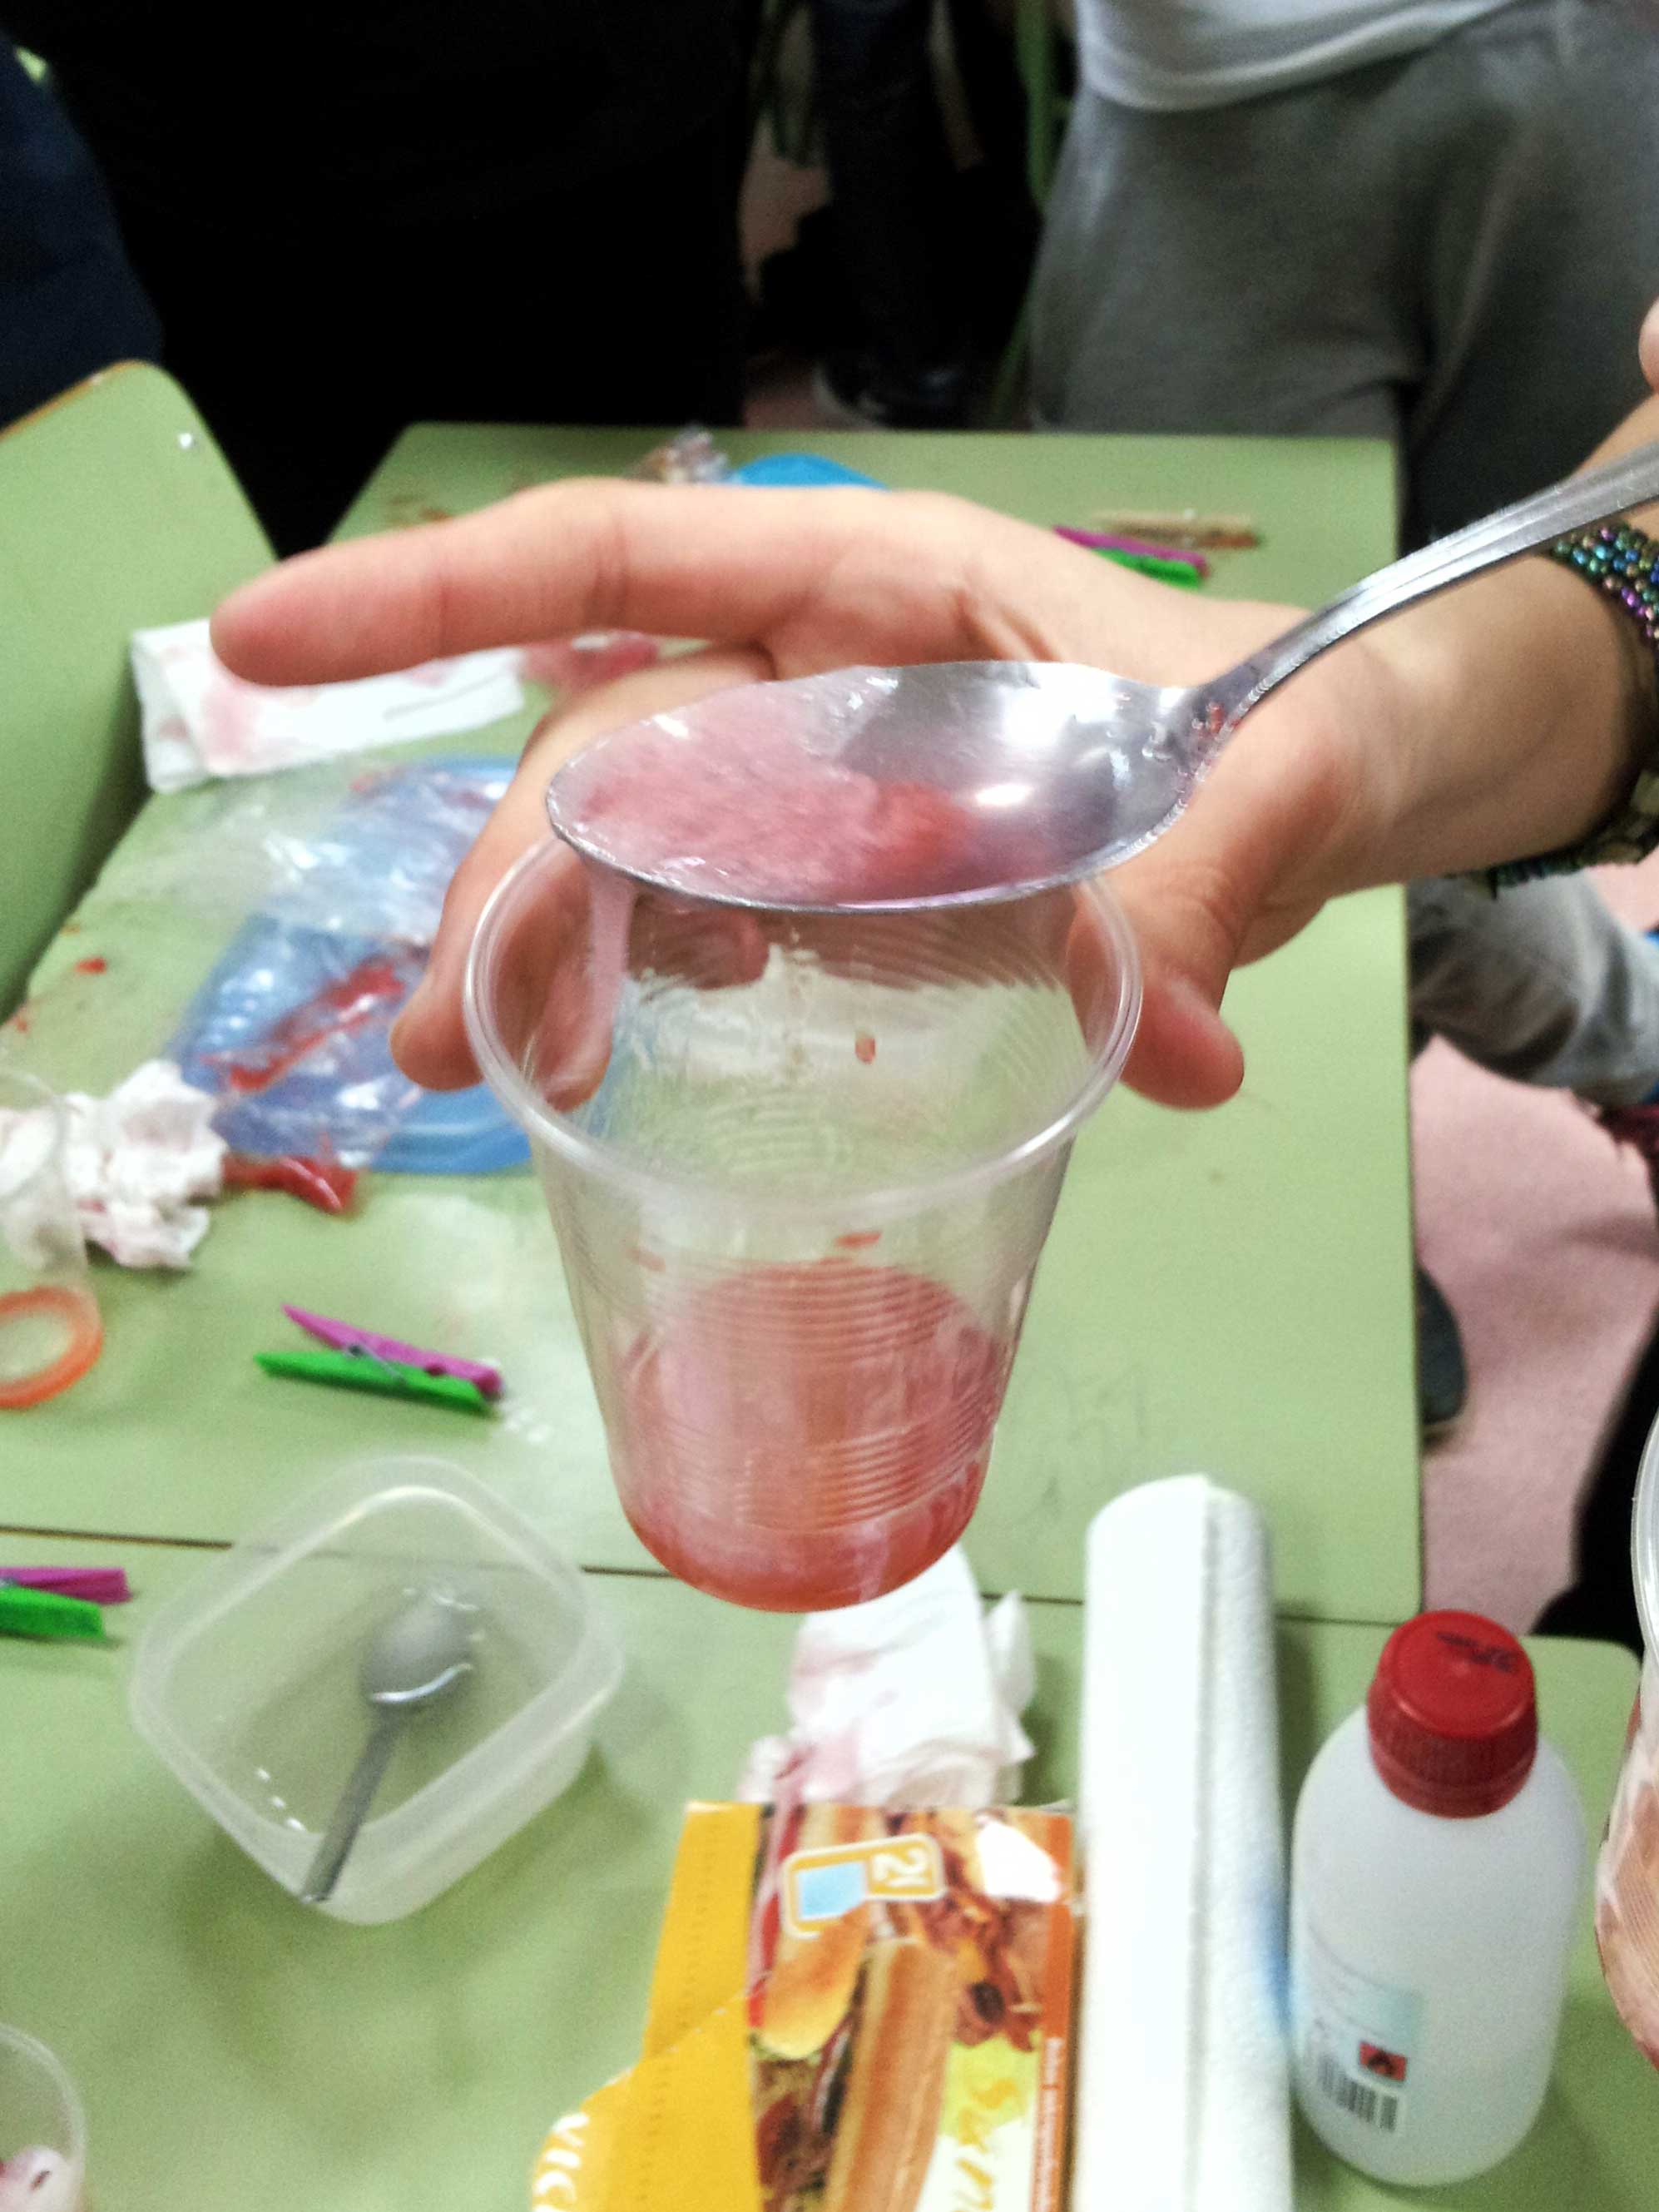 Extracting strawberry DNA